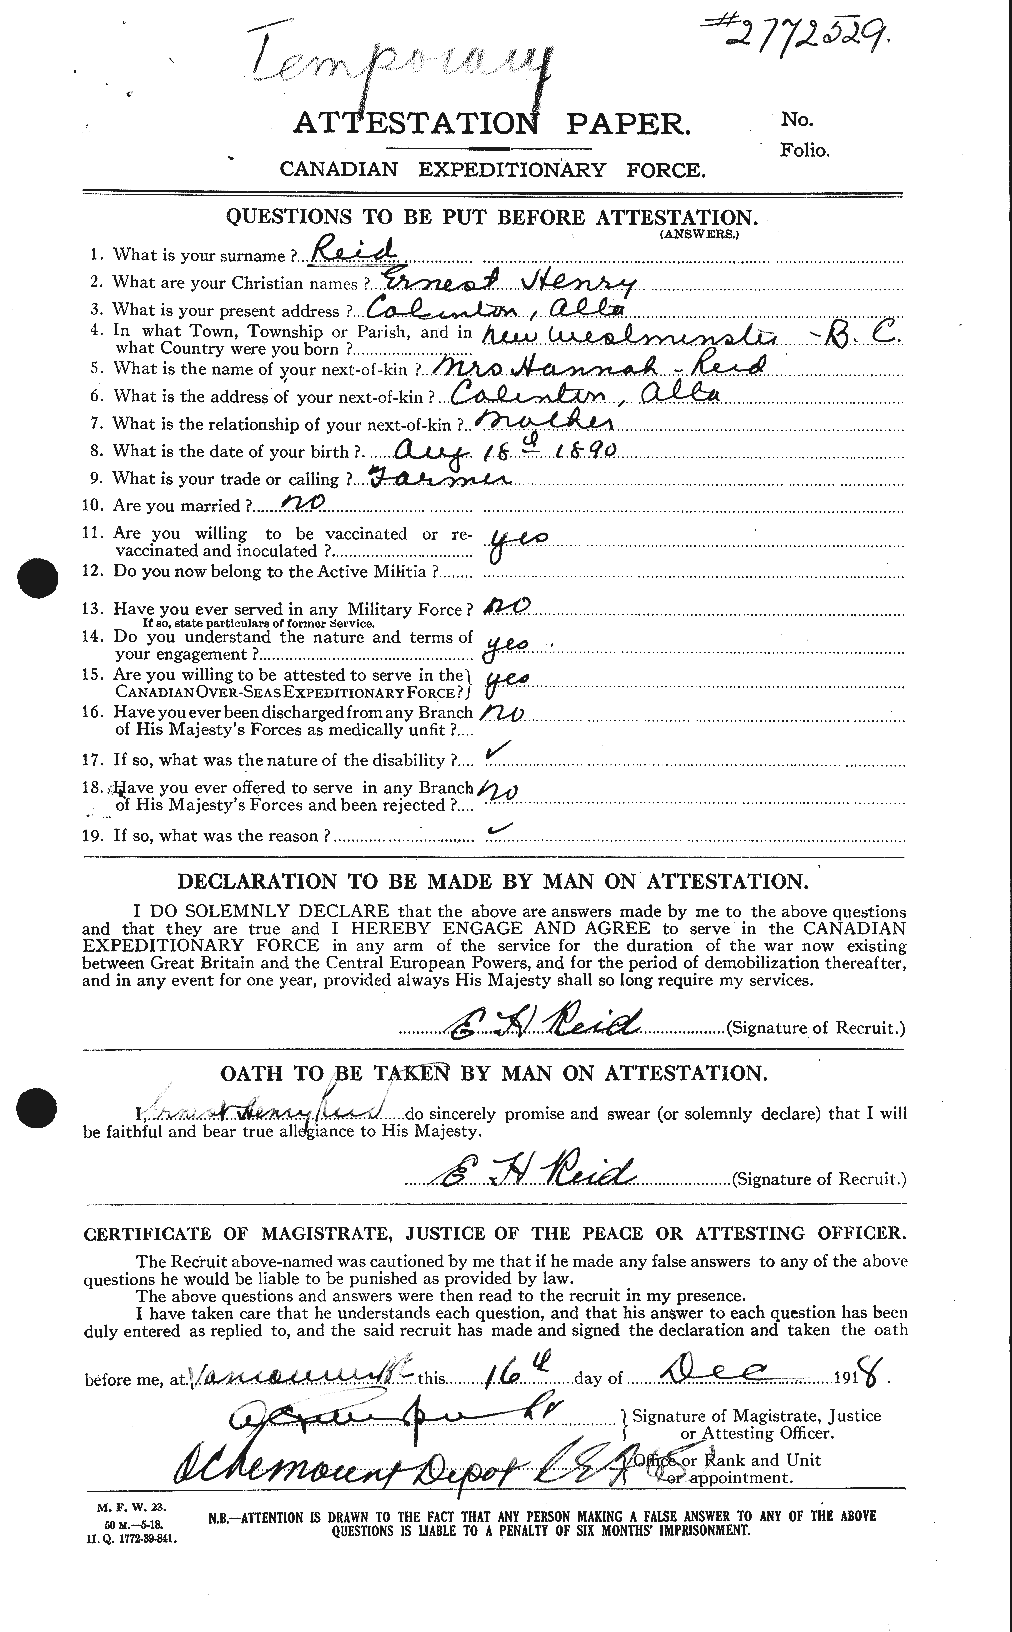 Personnel Records of the First World War - CEF 598019a